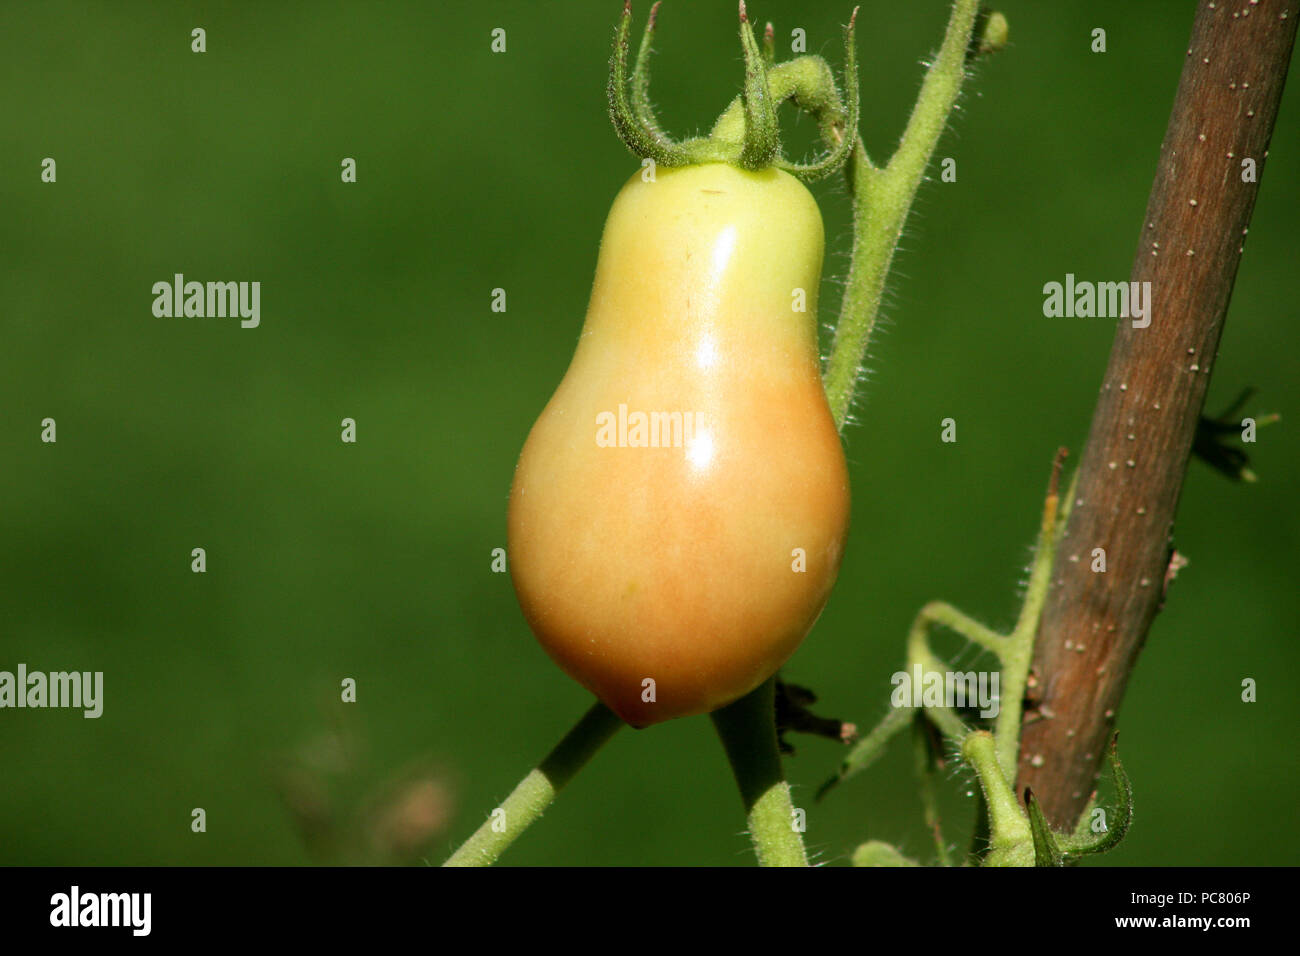 Pear tomato growing in the garden Stock Photo